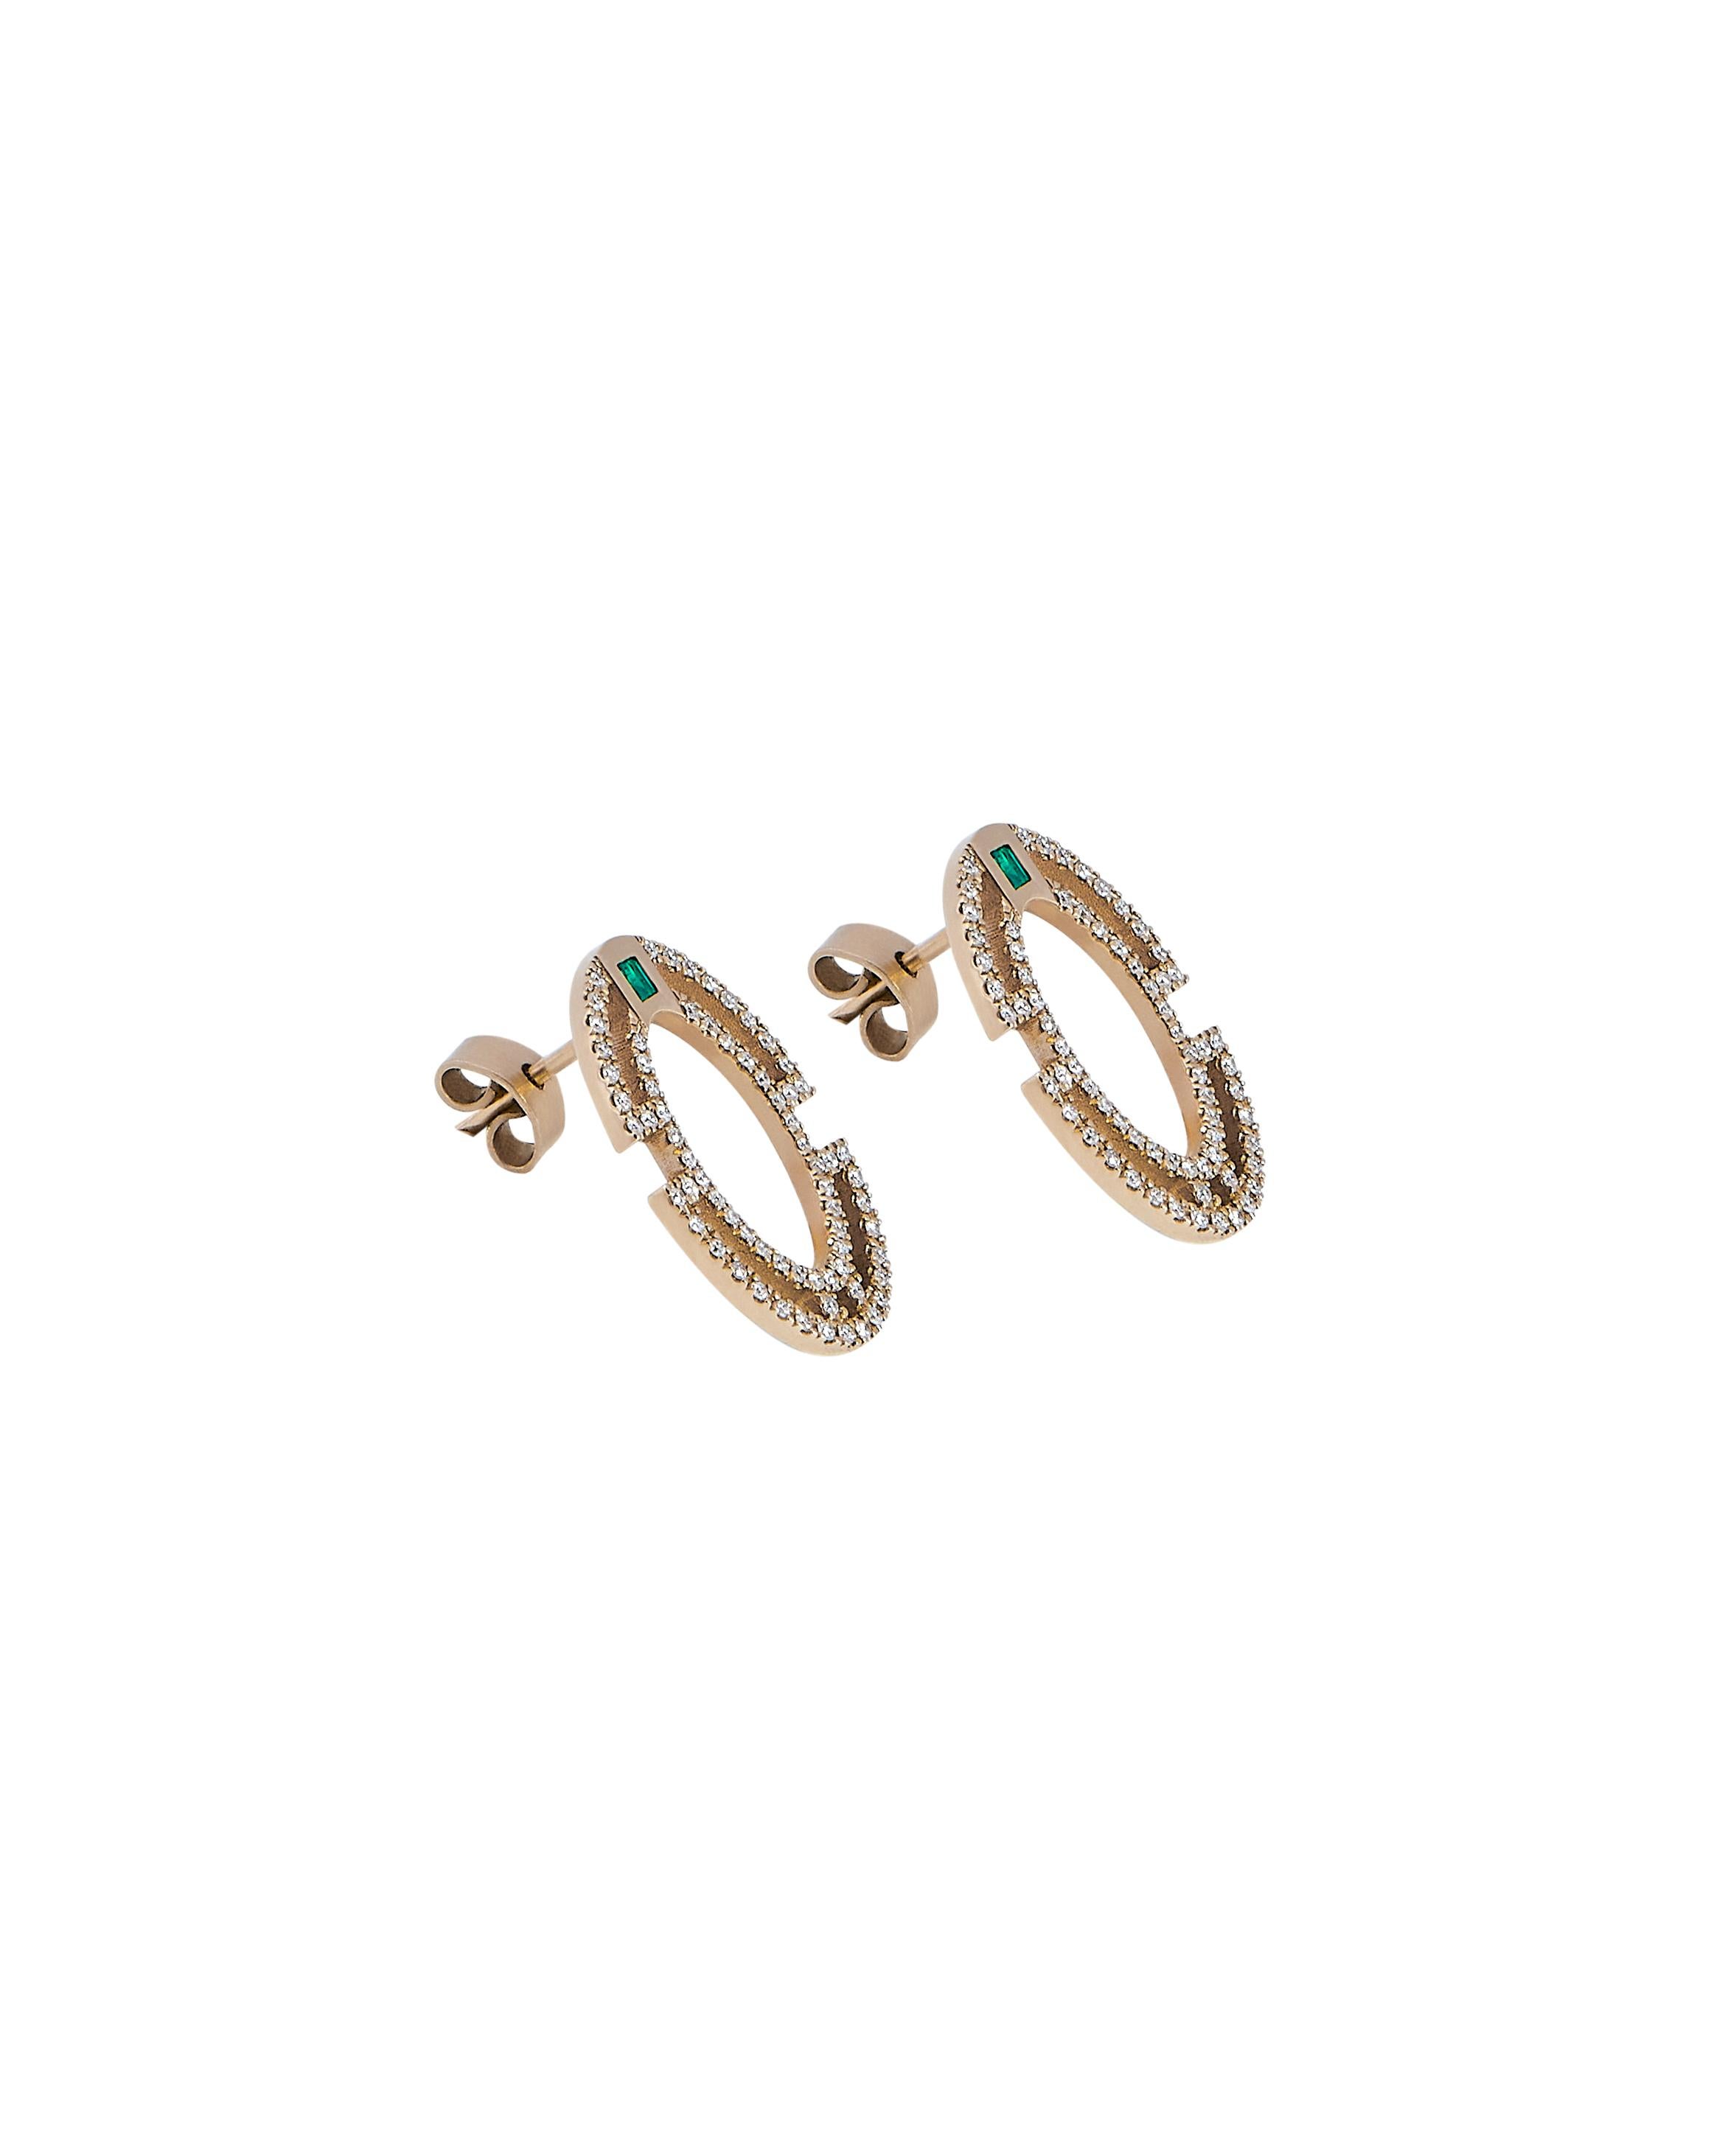 These earrings from POLINA ELLIS' BYZANTIUM collection are handcrafted in 18K raw white gold with 0,43ct white brilliant cut diamonds & 0,09ct emeralds.
Length: 1,90cm
Width: 1,80cm